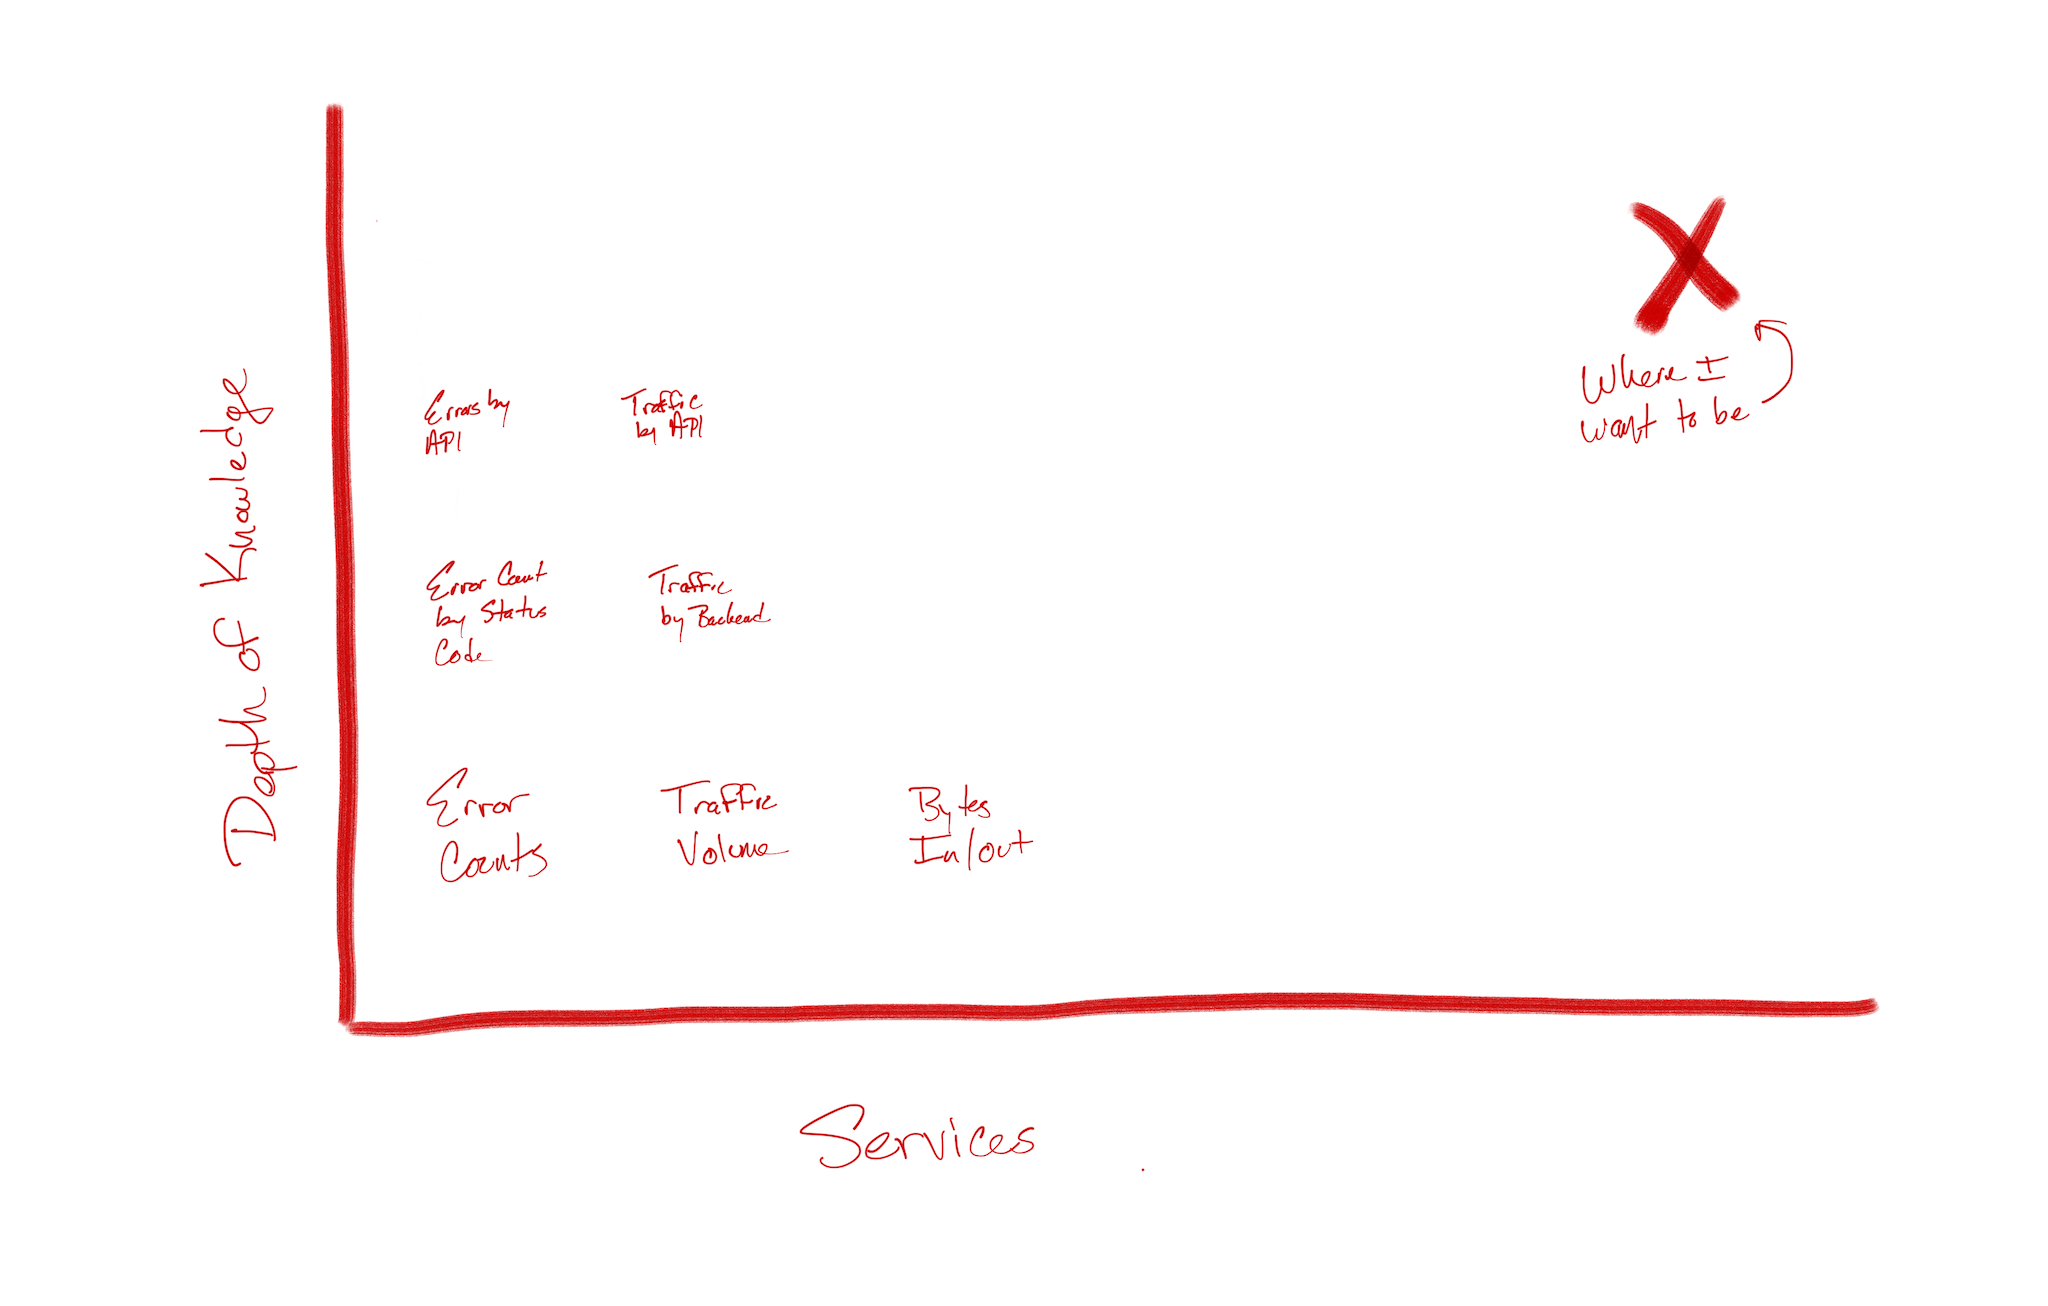 a hand drawn line graph in red with "Depth of Knowledge" on the y-axis and "Services" on the x-axis. a red "x" is at the top right corner of the draft with "Where I want to be" written underneath